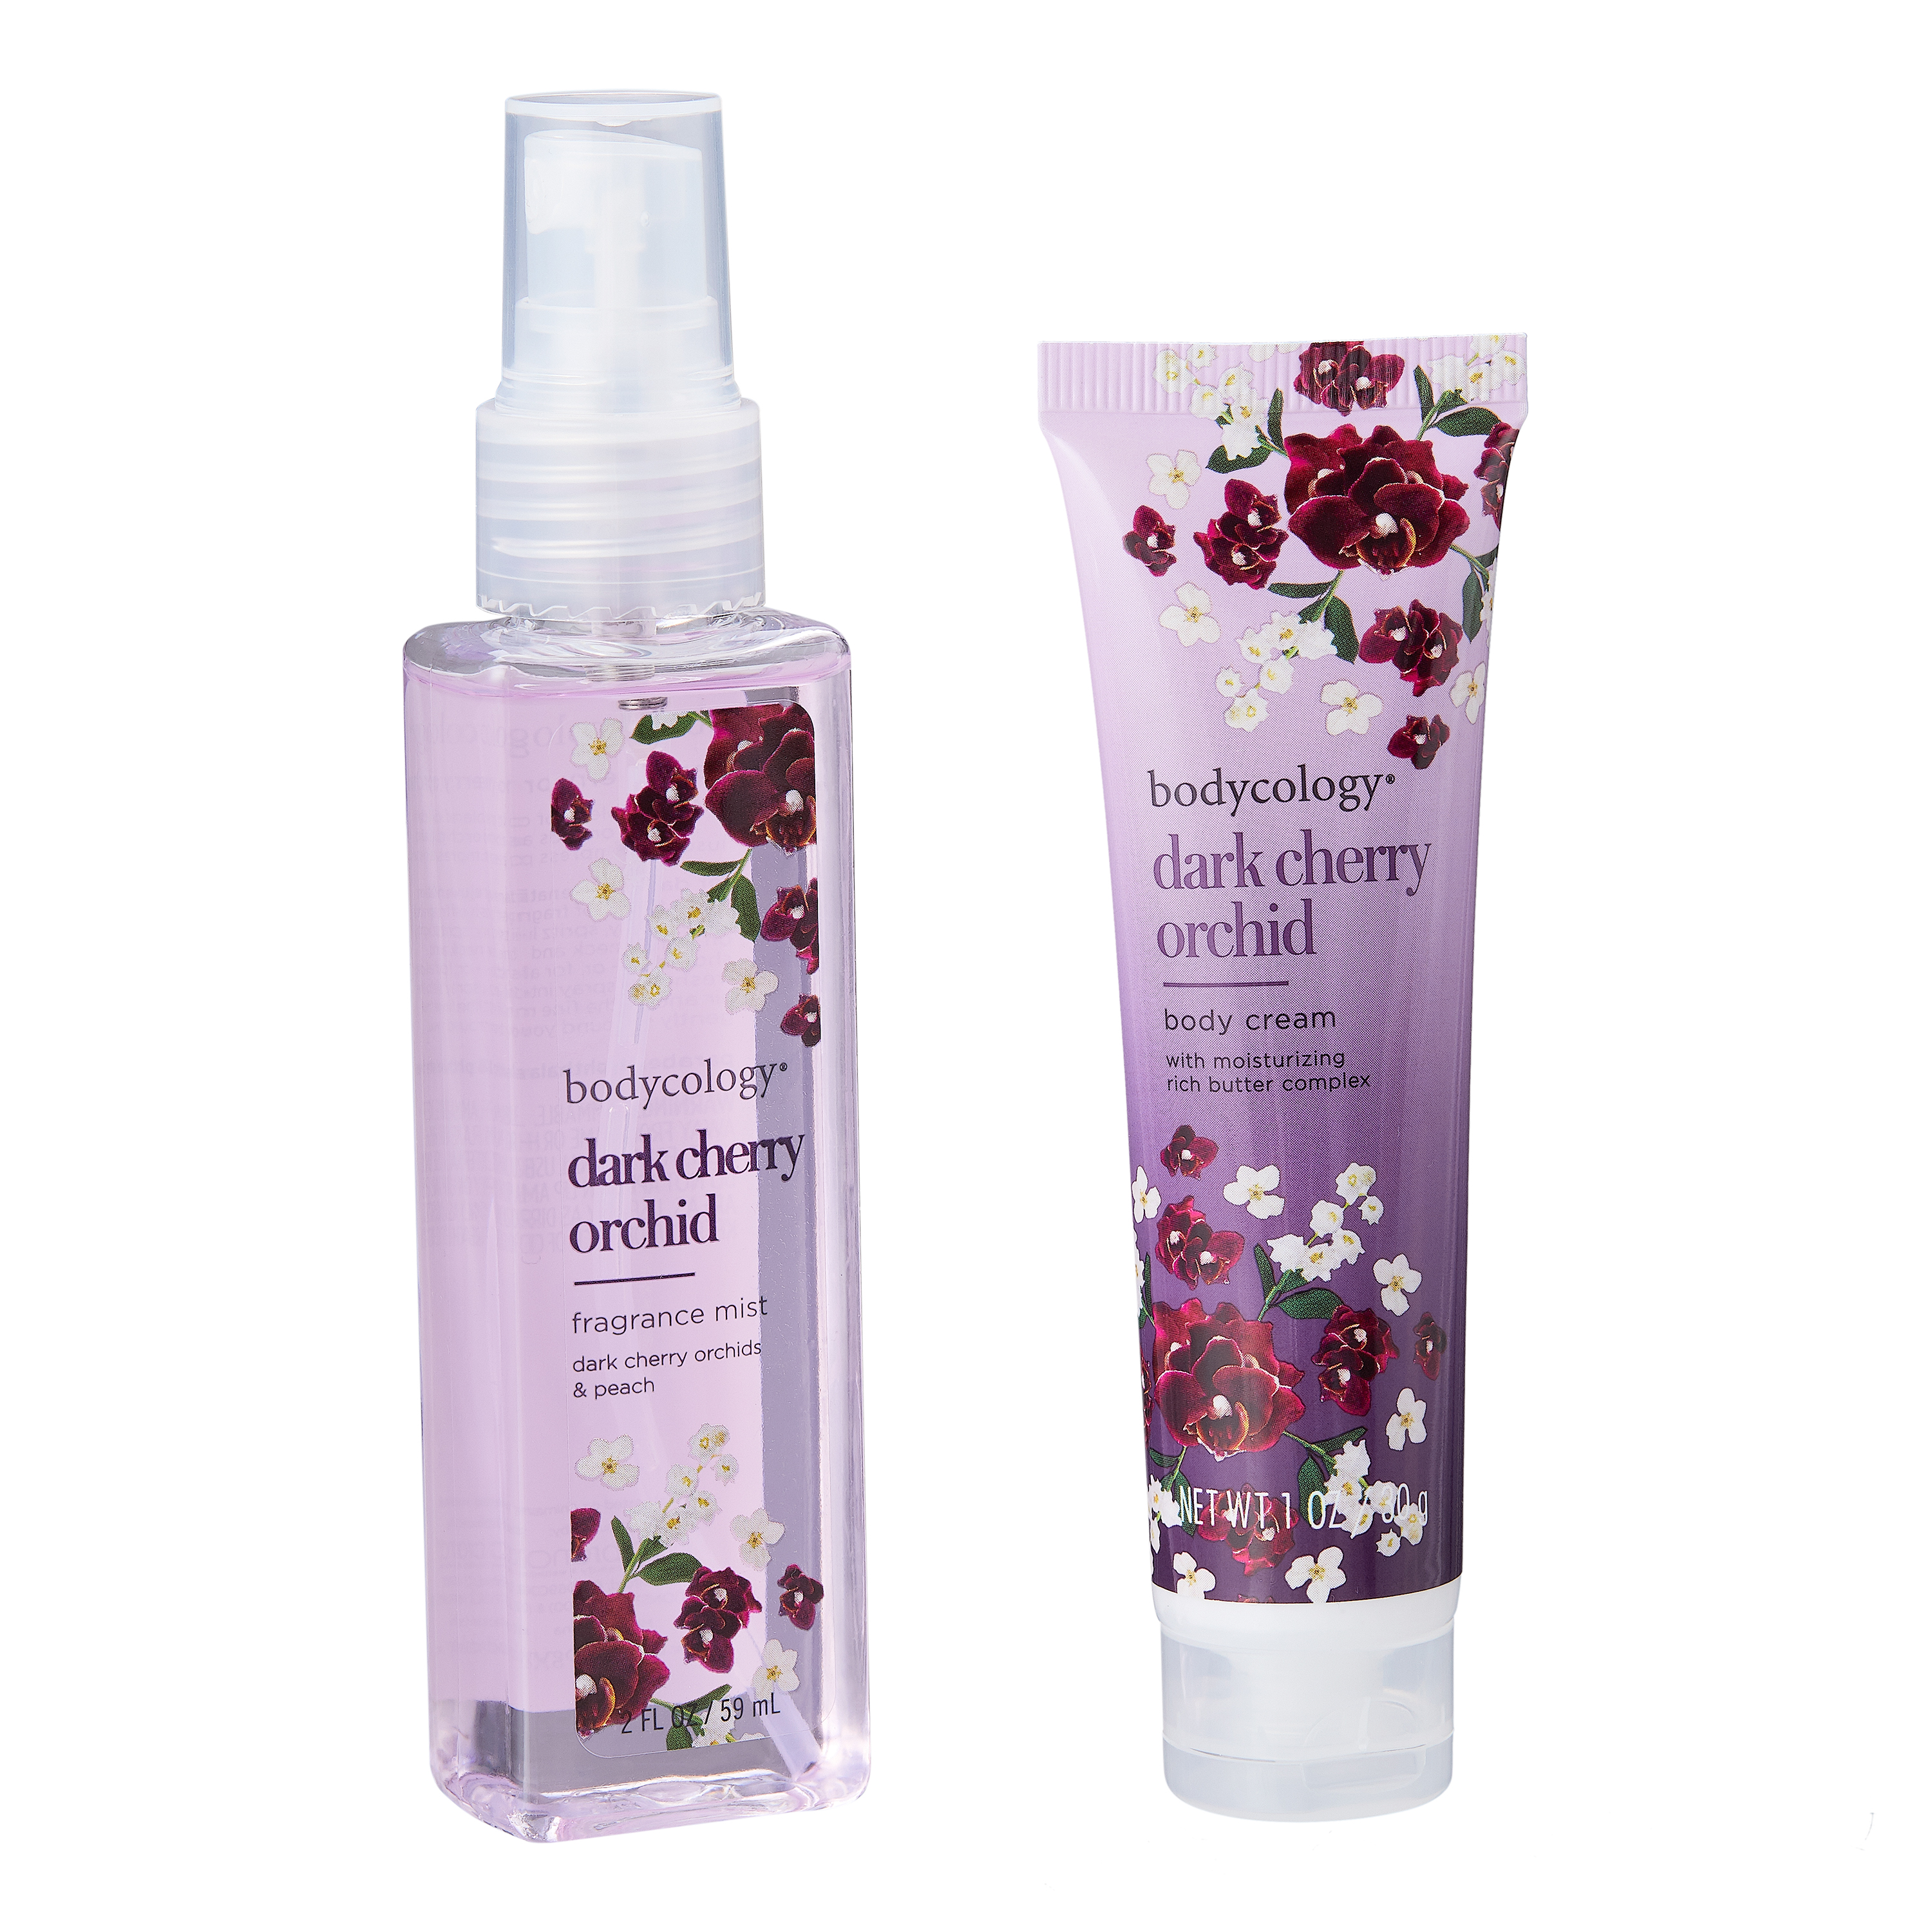 Bodycology 3-Piece Dark Cherry Orchid Fragrance Gift Set with Warm Socks - image 2 of 4